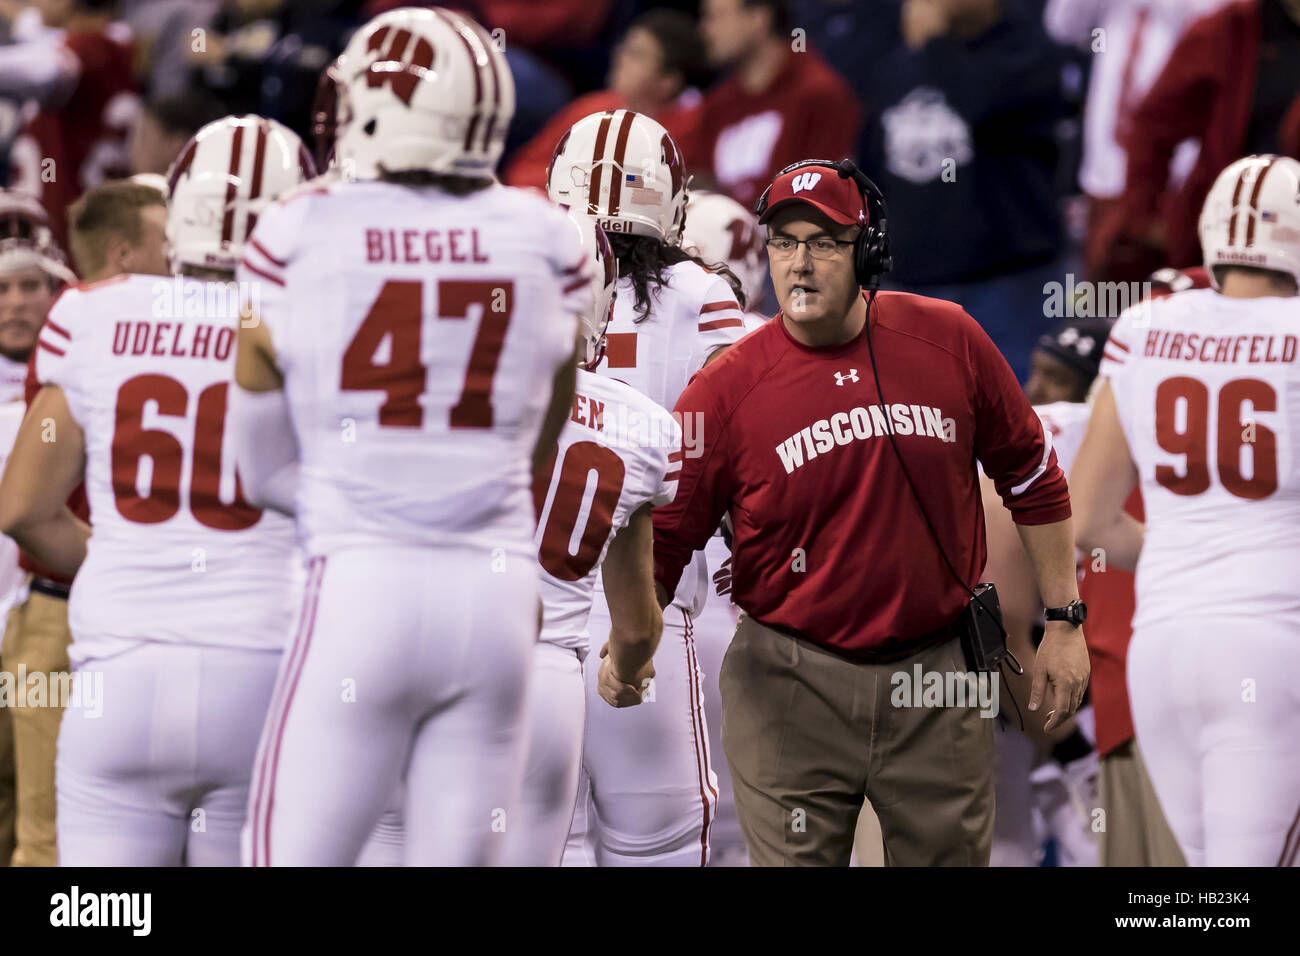 December 3, 2016 - Indianapolis, Indiana, U.S - December 3, 2016 - Indianapolis, Indiana - Wisconsin Badgers head coach Paul Chryst celebrates after Wisconsin Badgers running back Corey Clement (6) scores a touchdown in the first half during the Big Ten Championship game between Penn State Nittany Lions and Wisconsin Badgers at Lucas Oil Stadium. (Credit Image: © Scott Taetsch via ZUMA Wire) Stock Photo